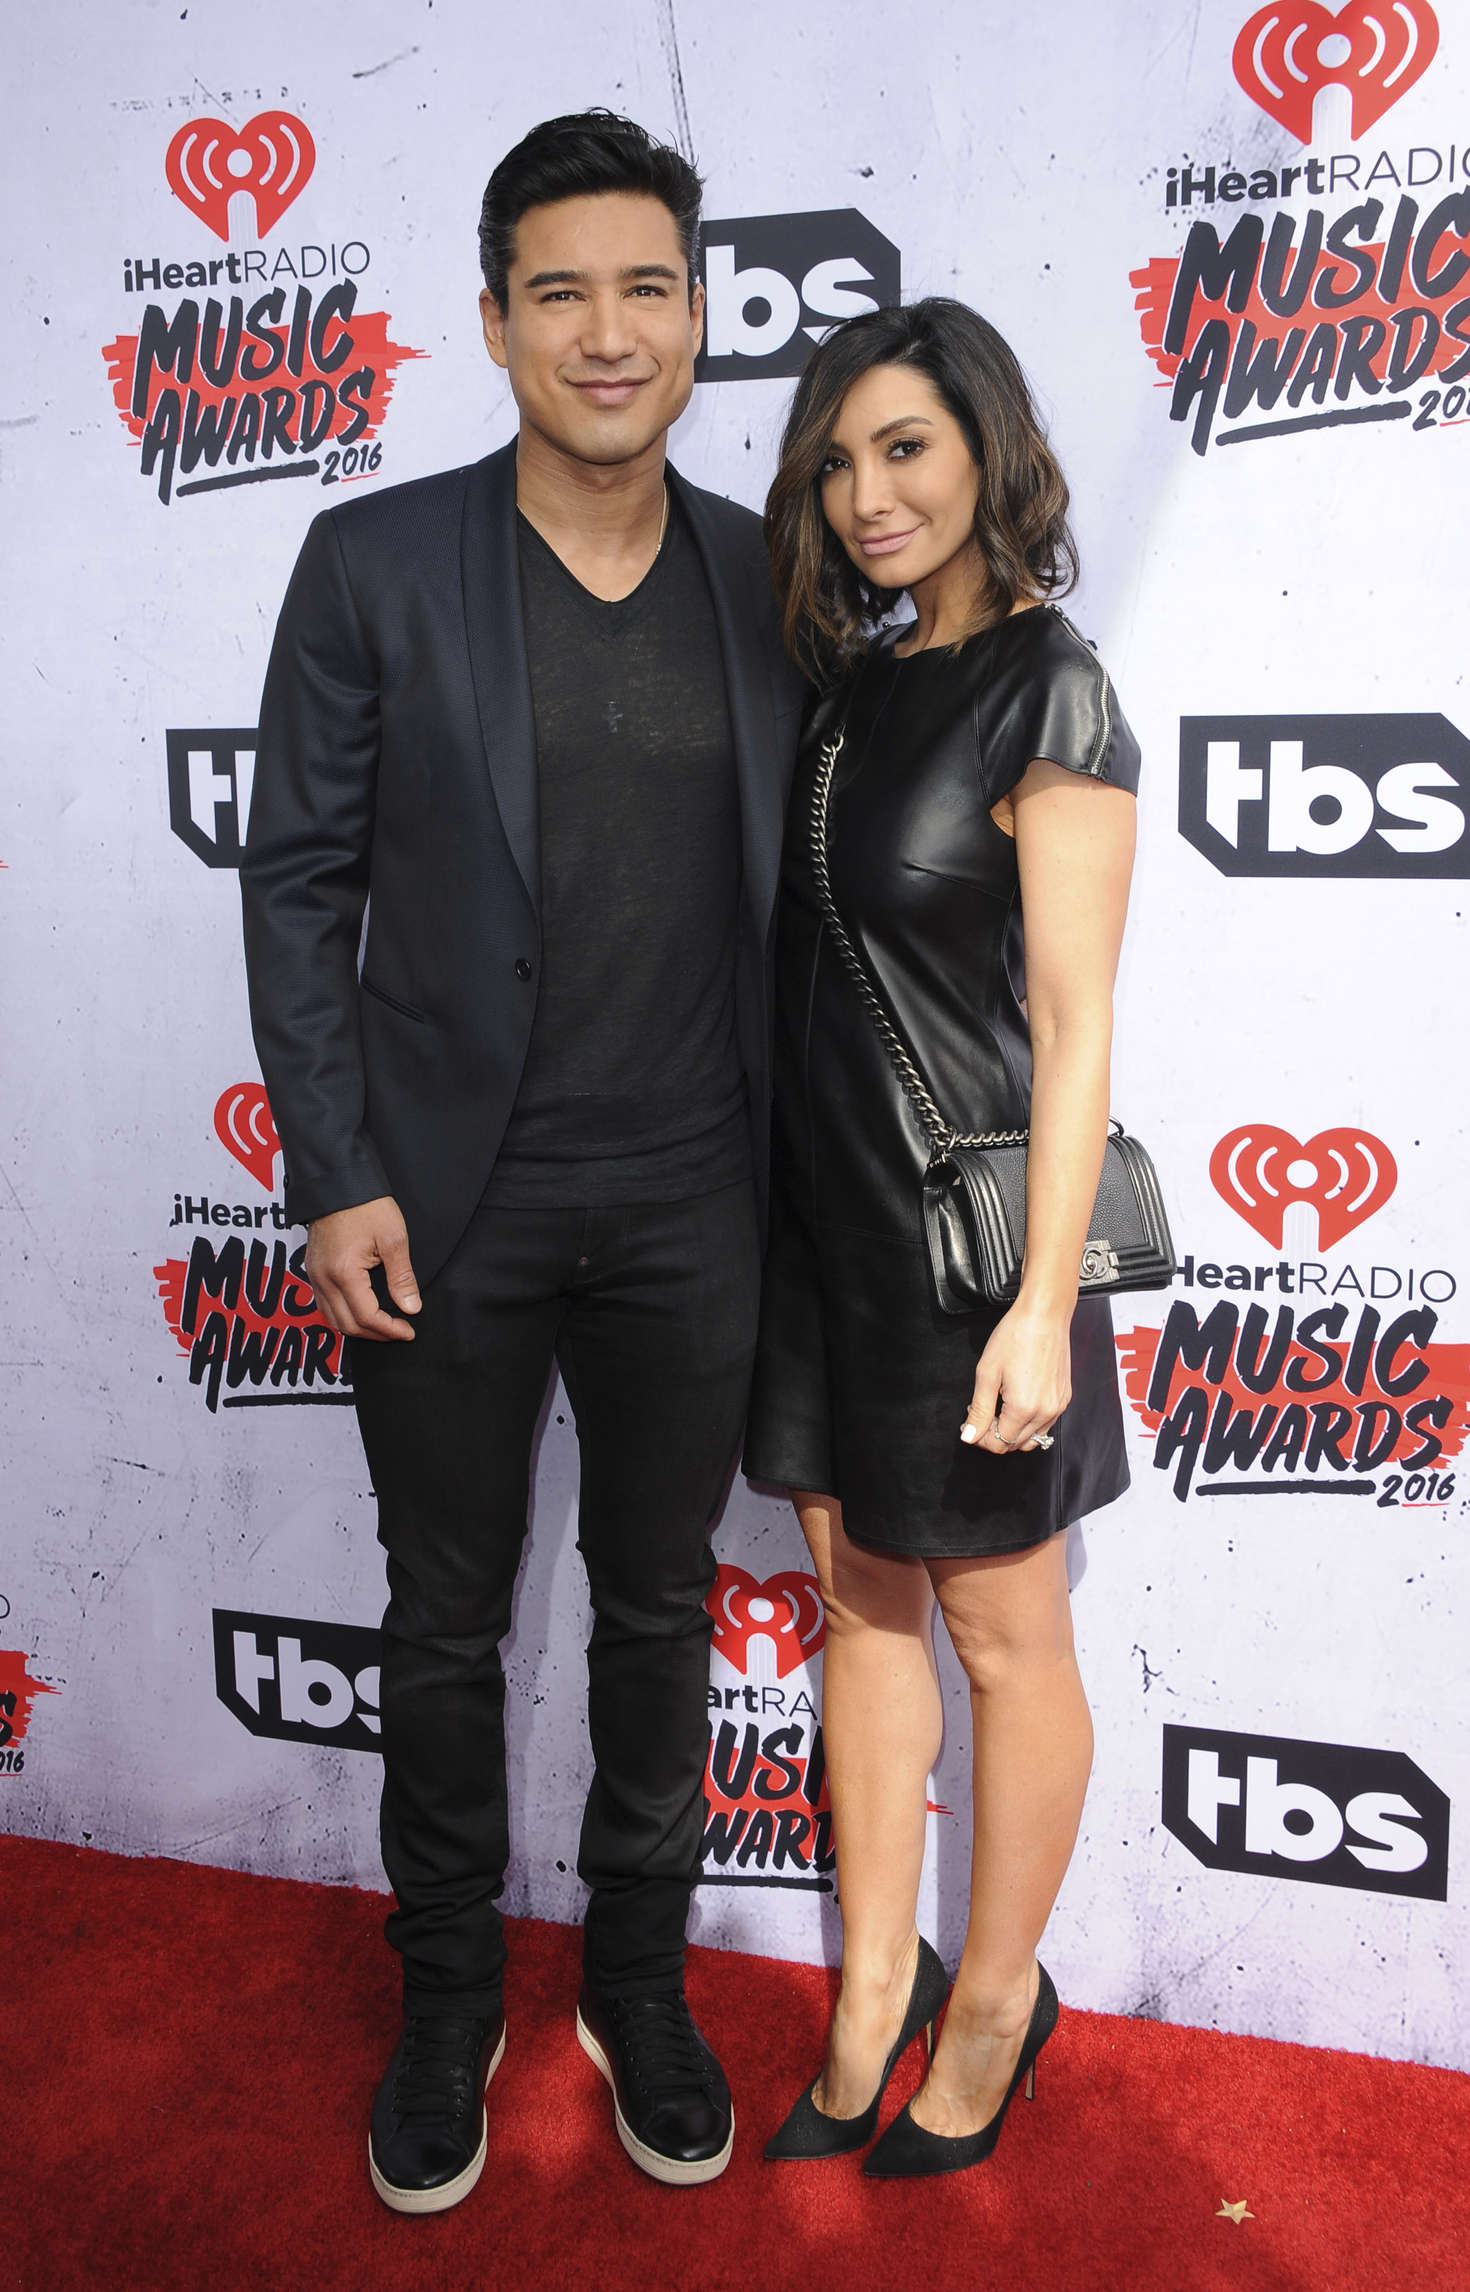 Courtney Mazza attends the iHeartRadio Music Awards